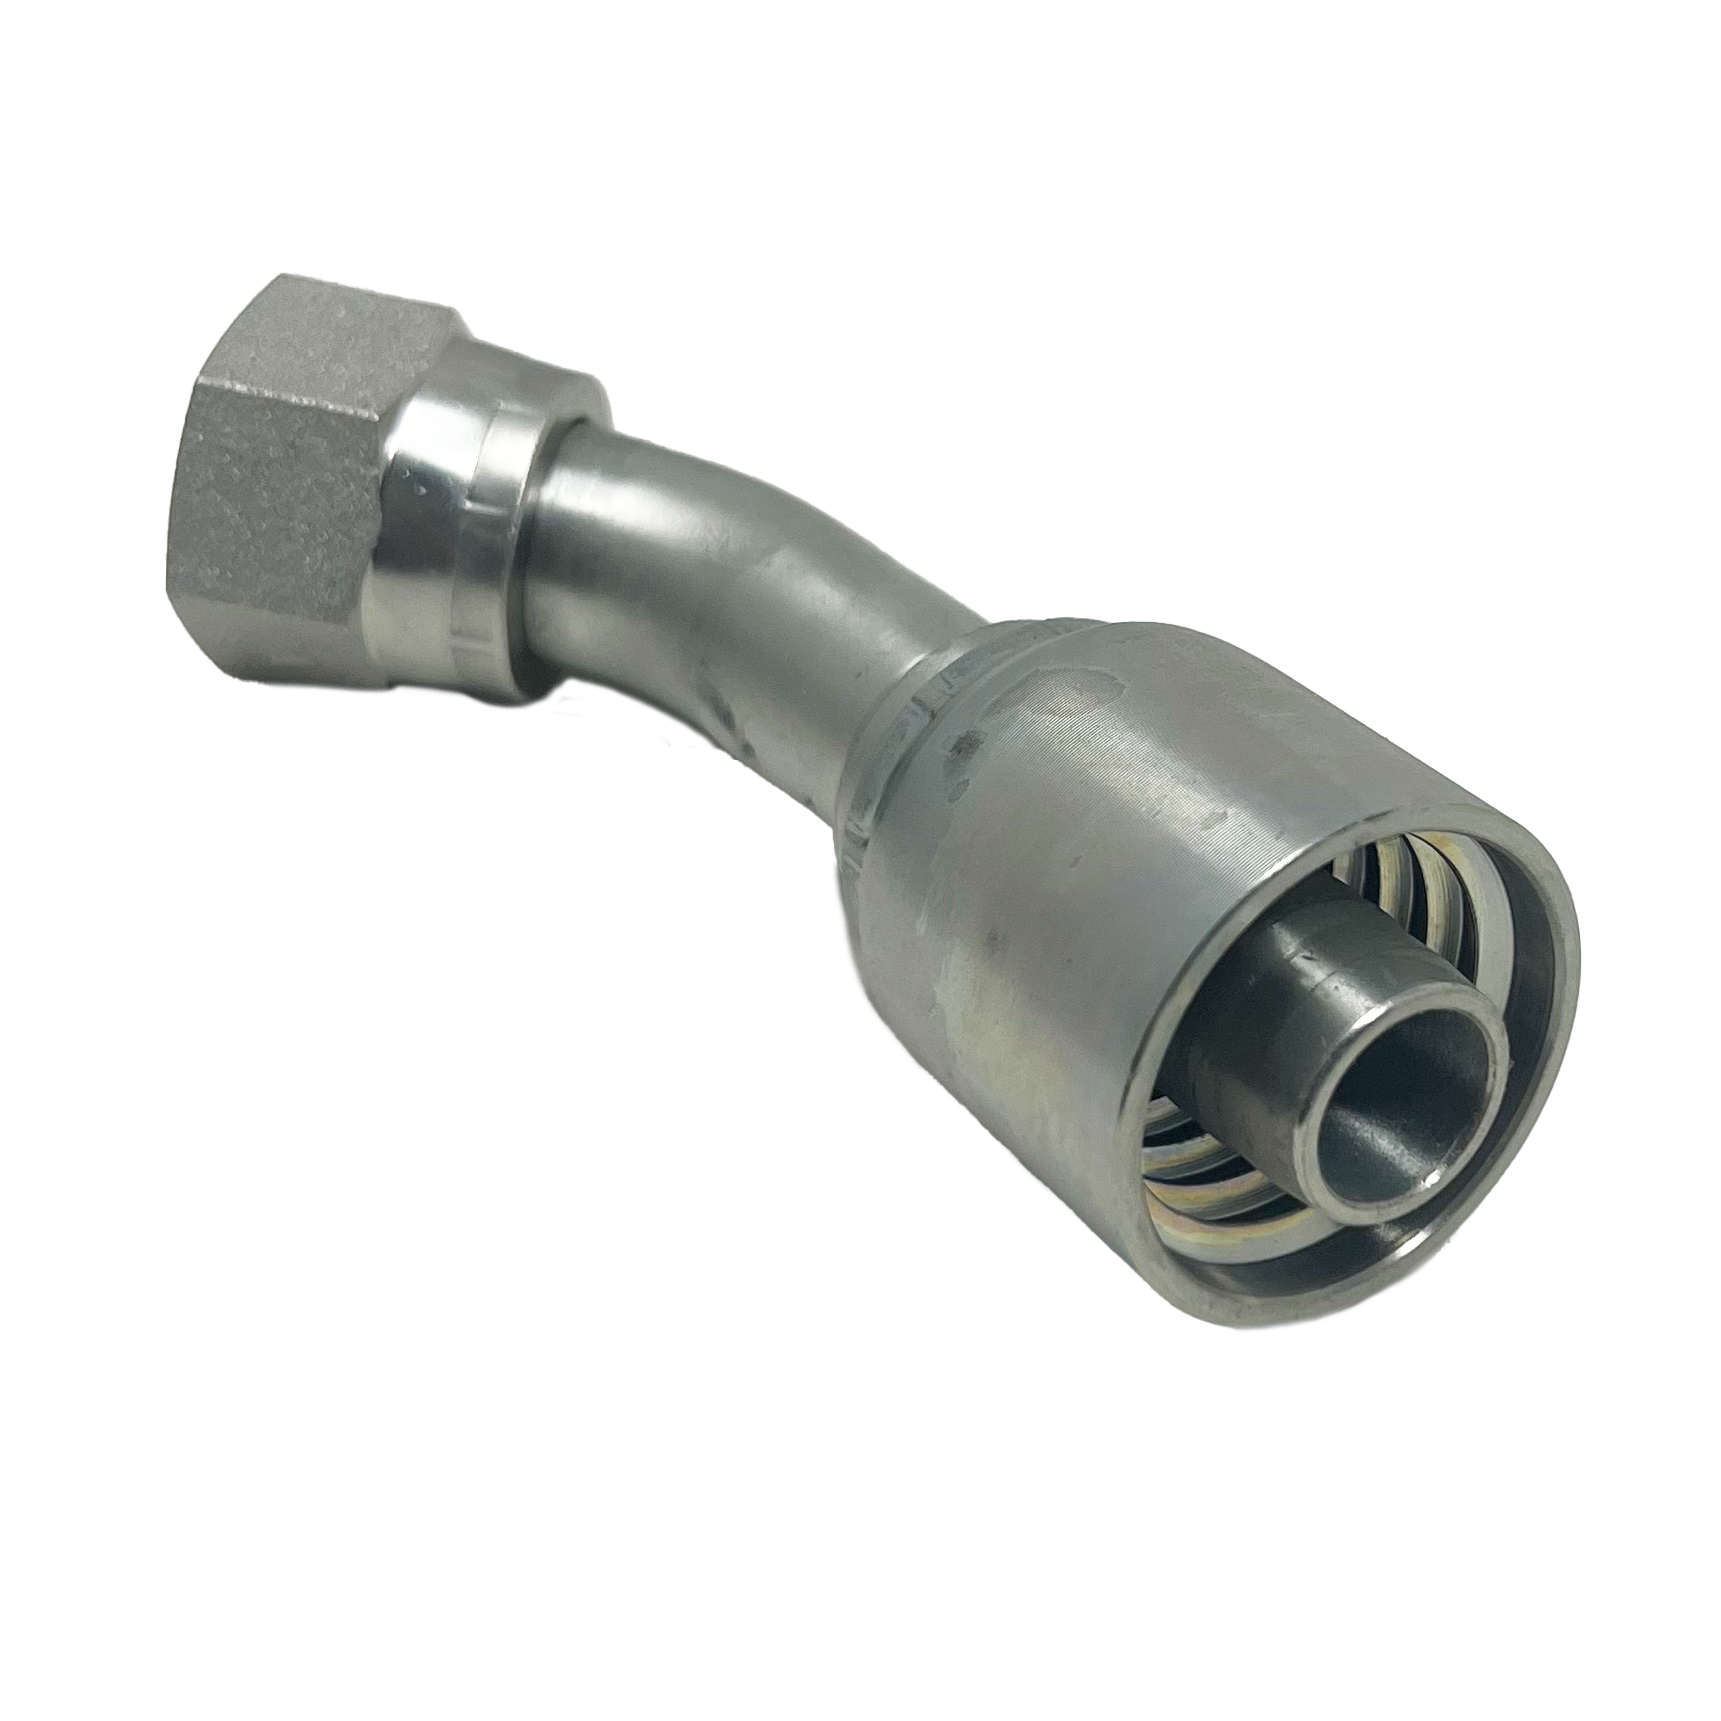 B2-JCFX45-1212: Continental Hose Fitting, 0.75 (3/4") Hose ID x 1-1/16-12           Female JIC, 45-Degree Swivel Connection